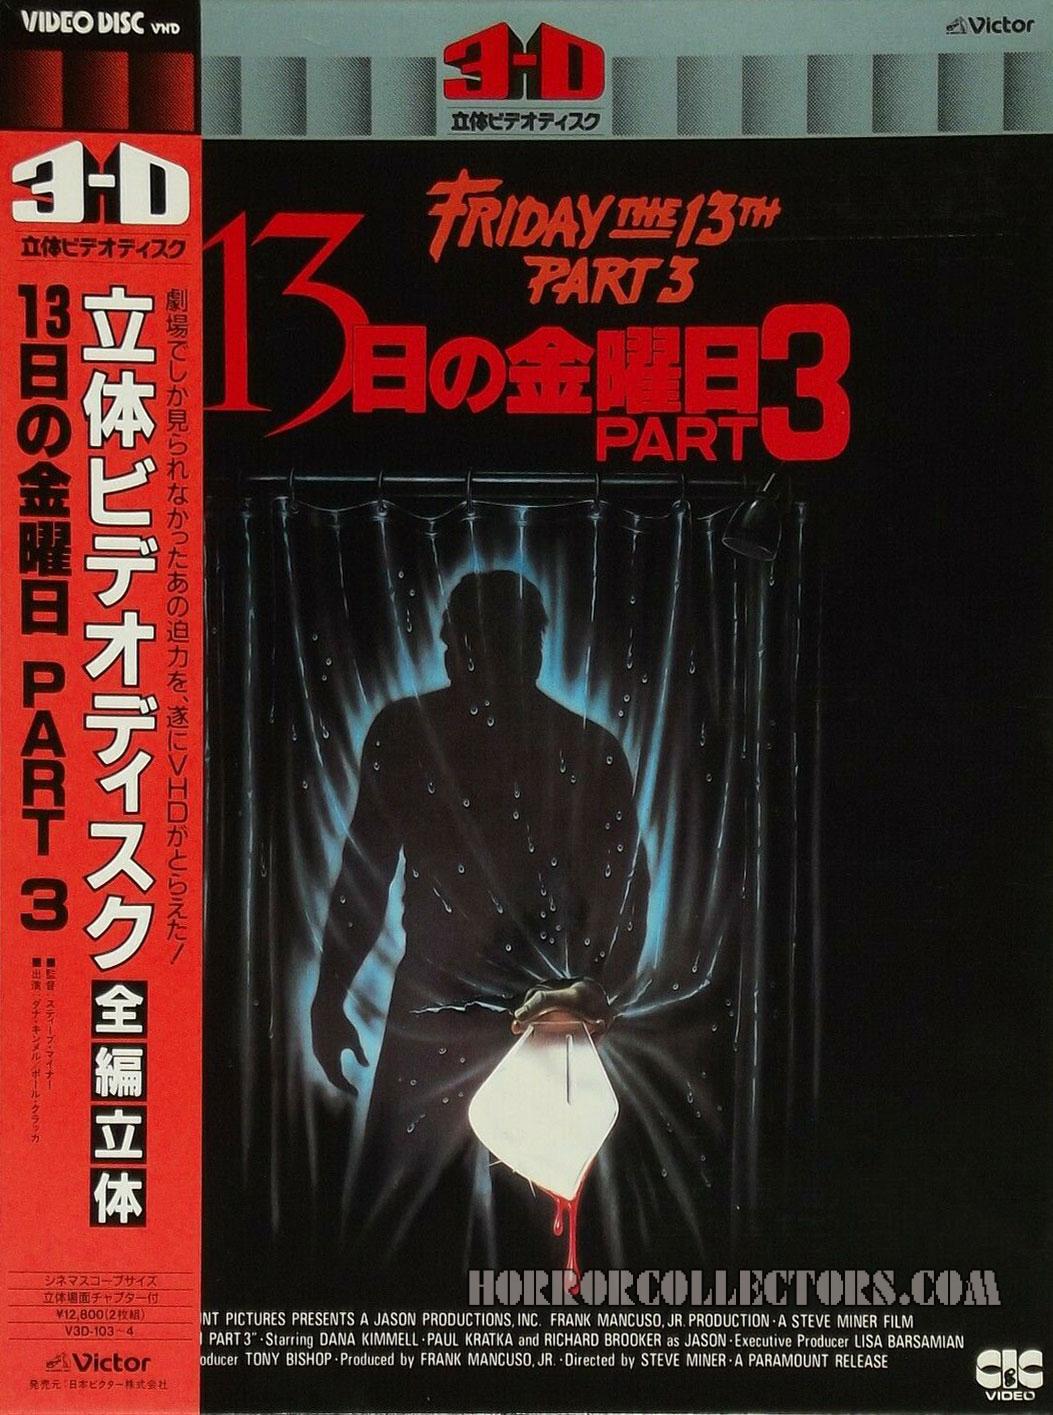 FRIDAY THE 13TH Part 3 in 3D JAPAN VHD VIDEO DISC